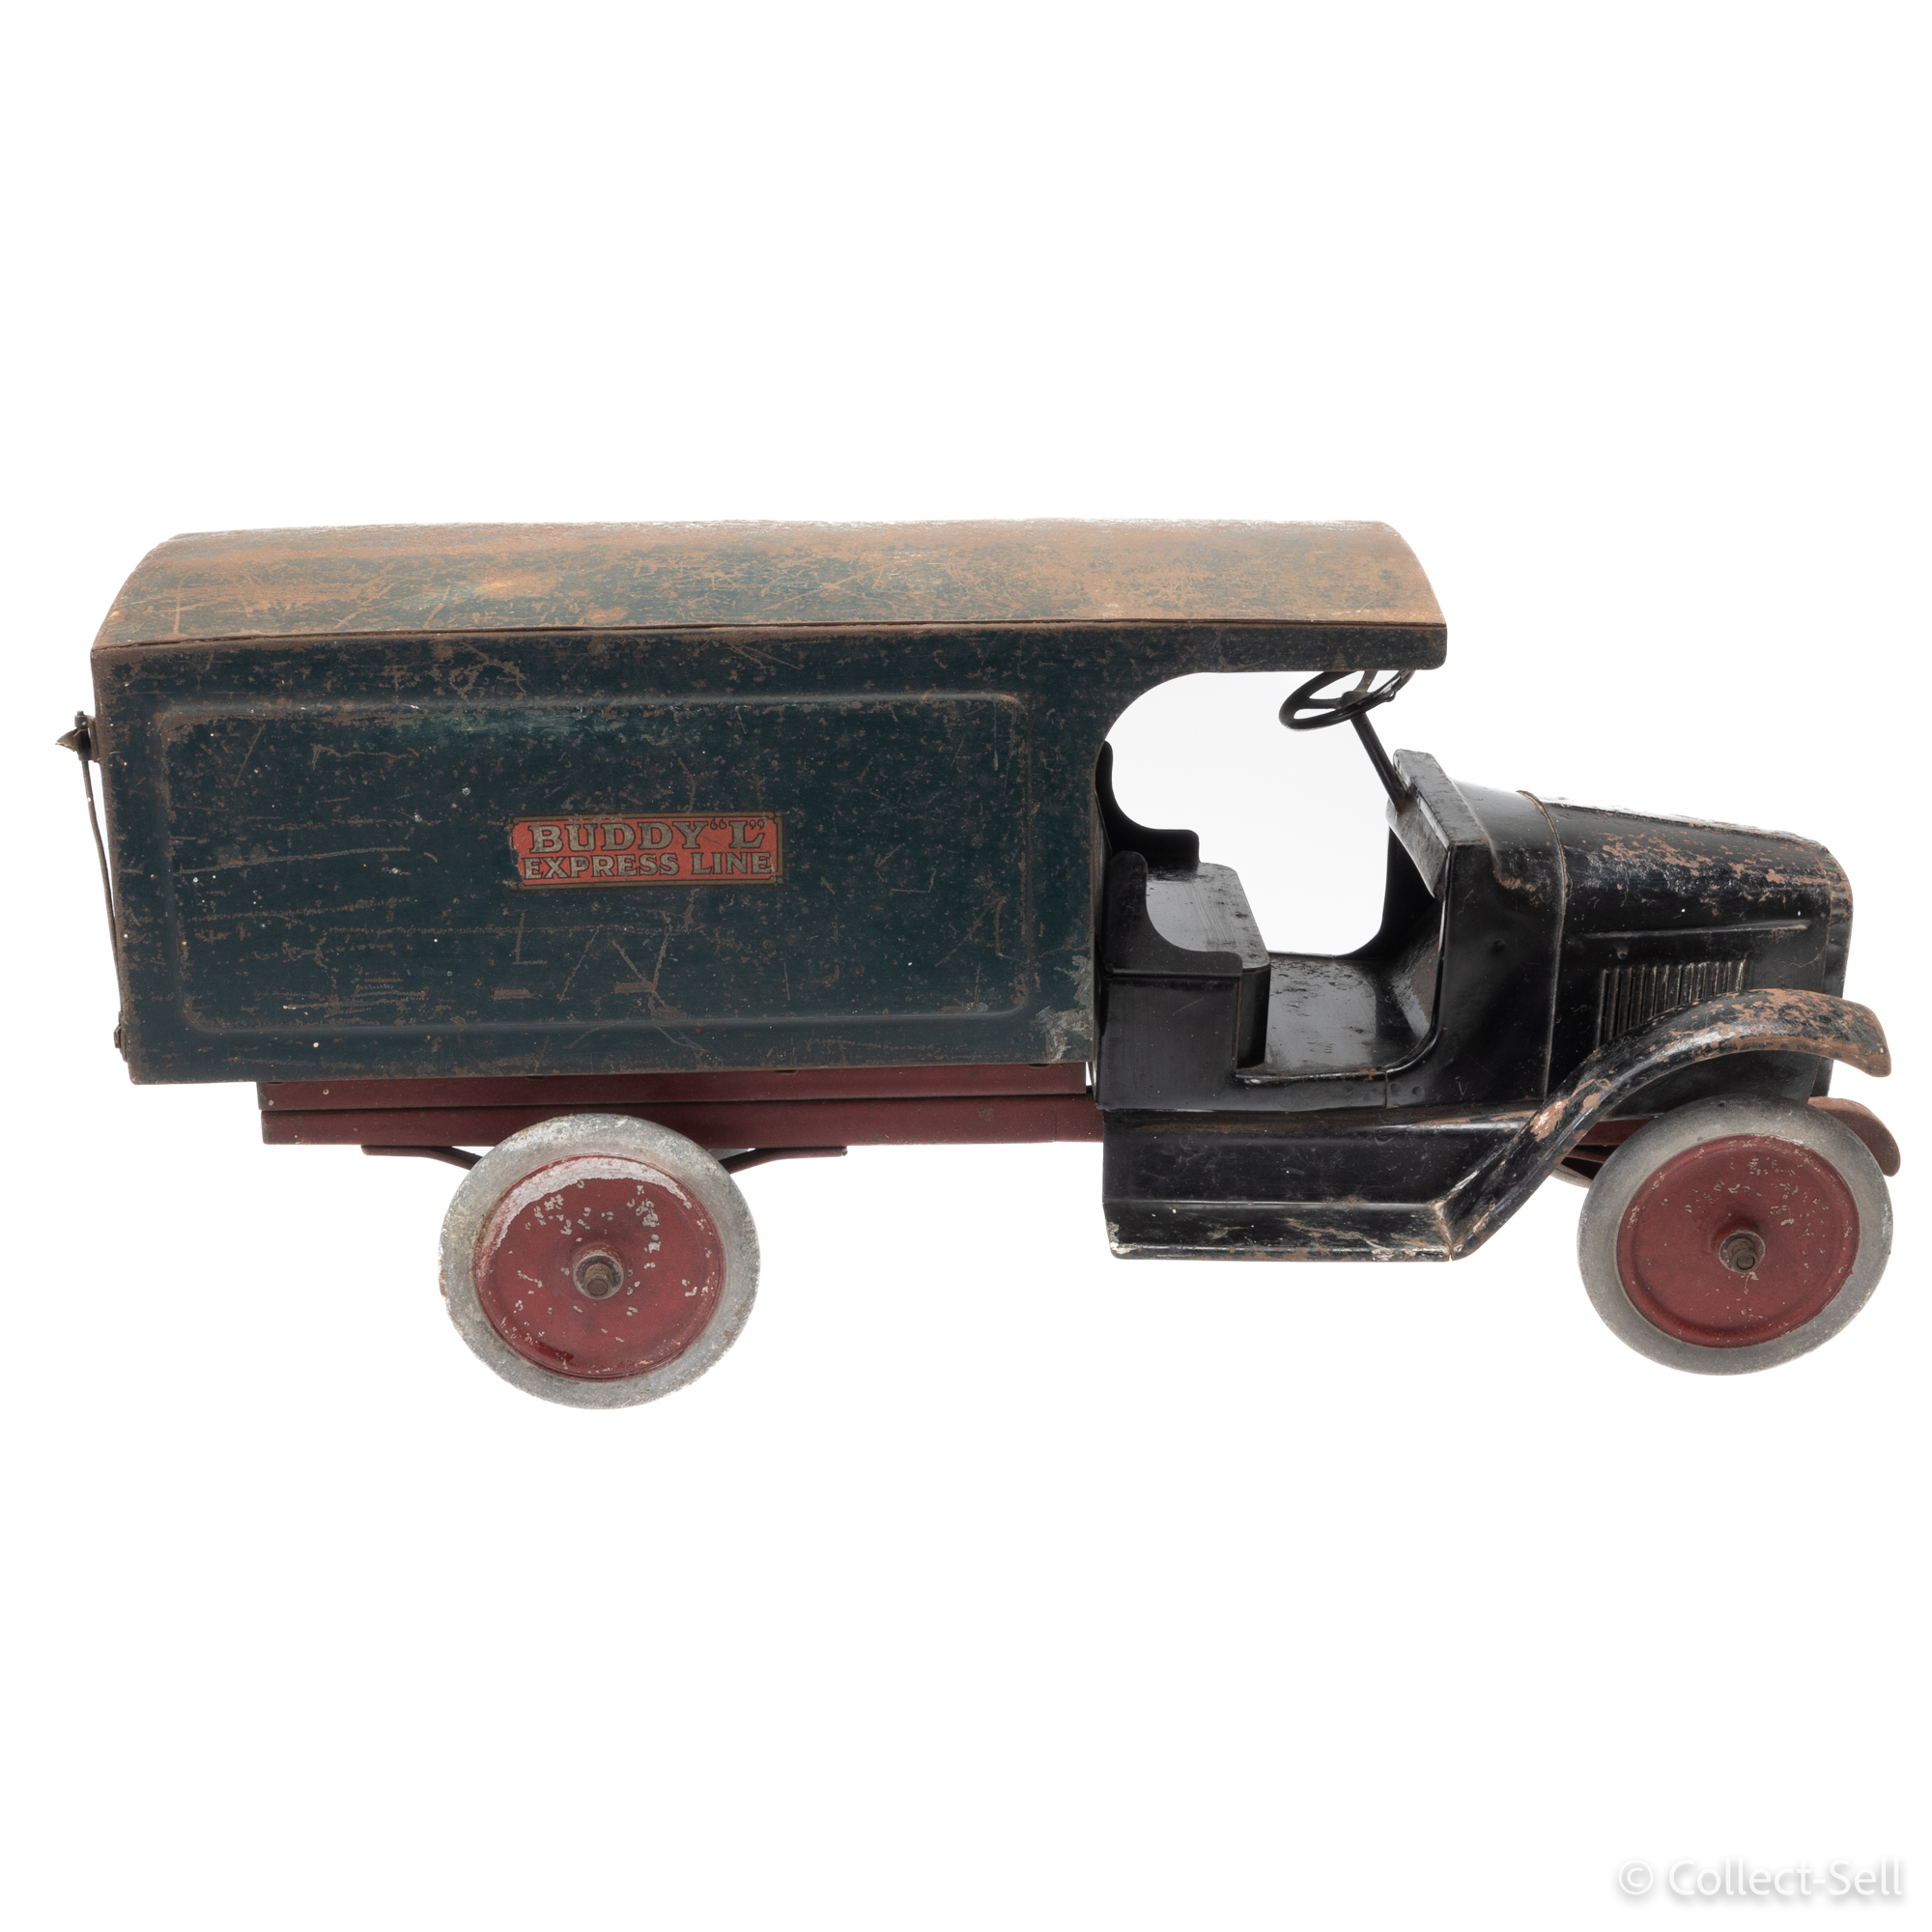 Large Delivery Pressed Steel Toy Truck